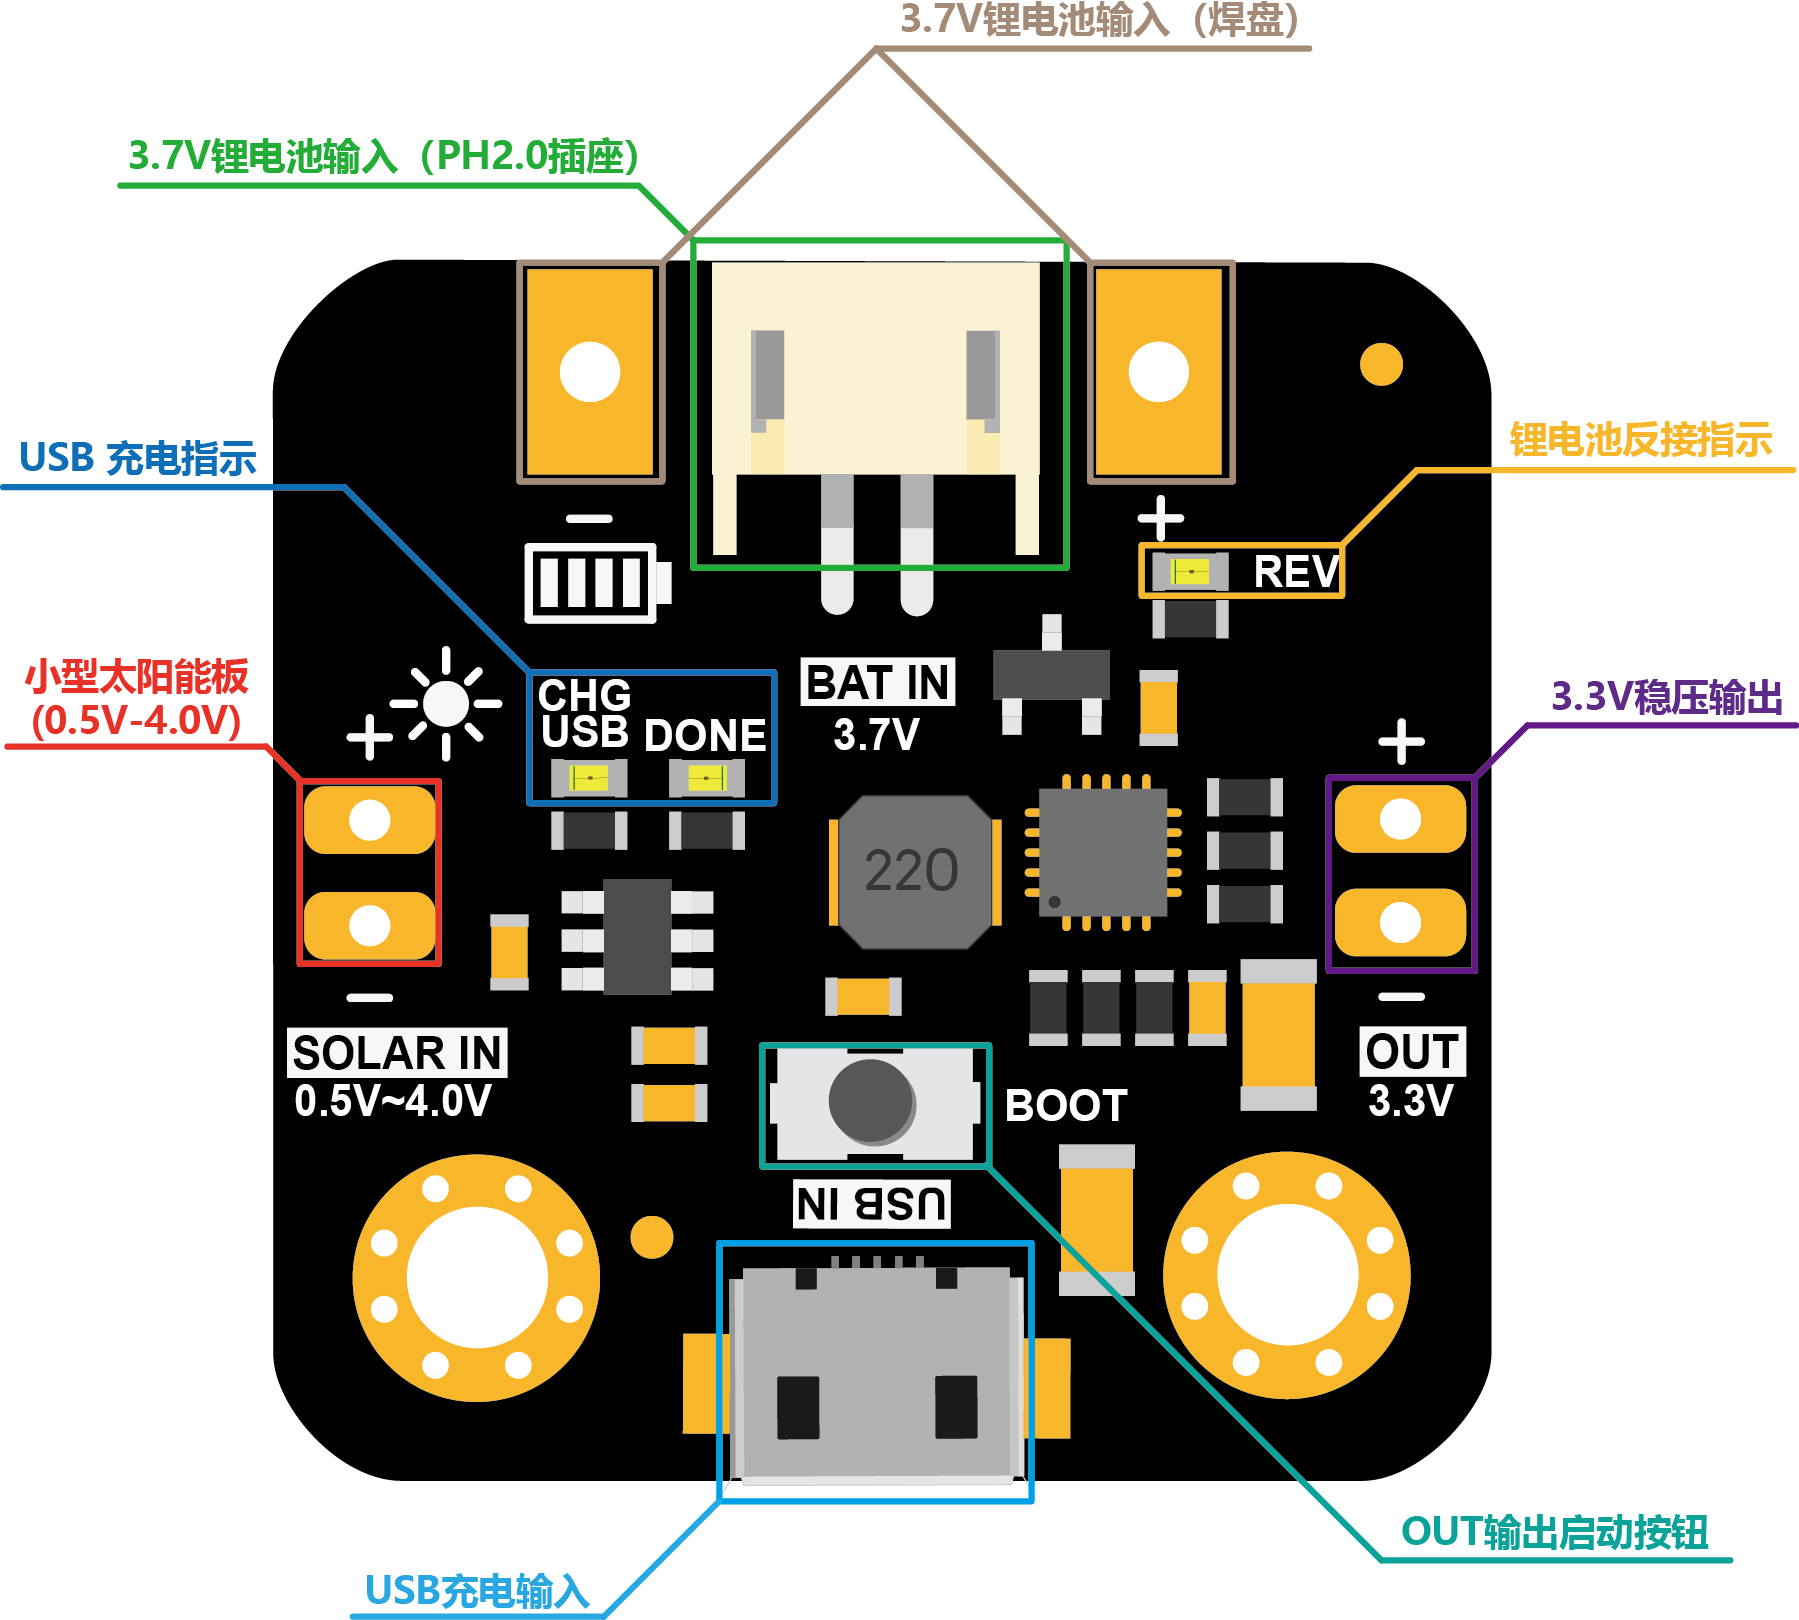 DFR0579_overview(CH).png